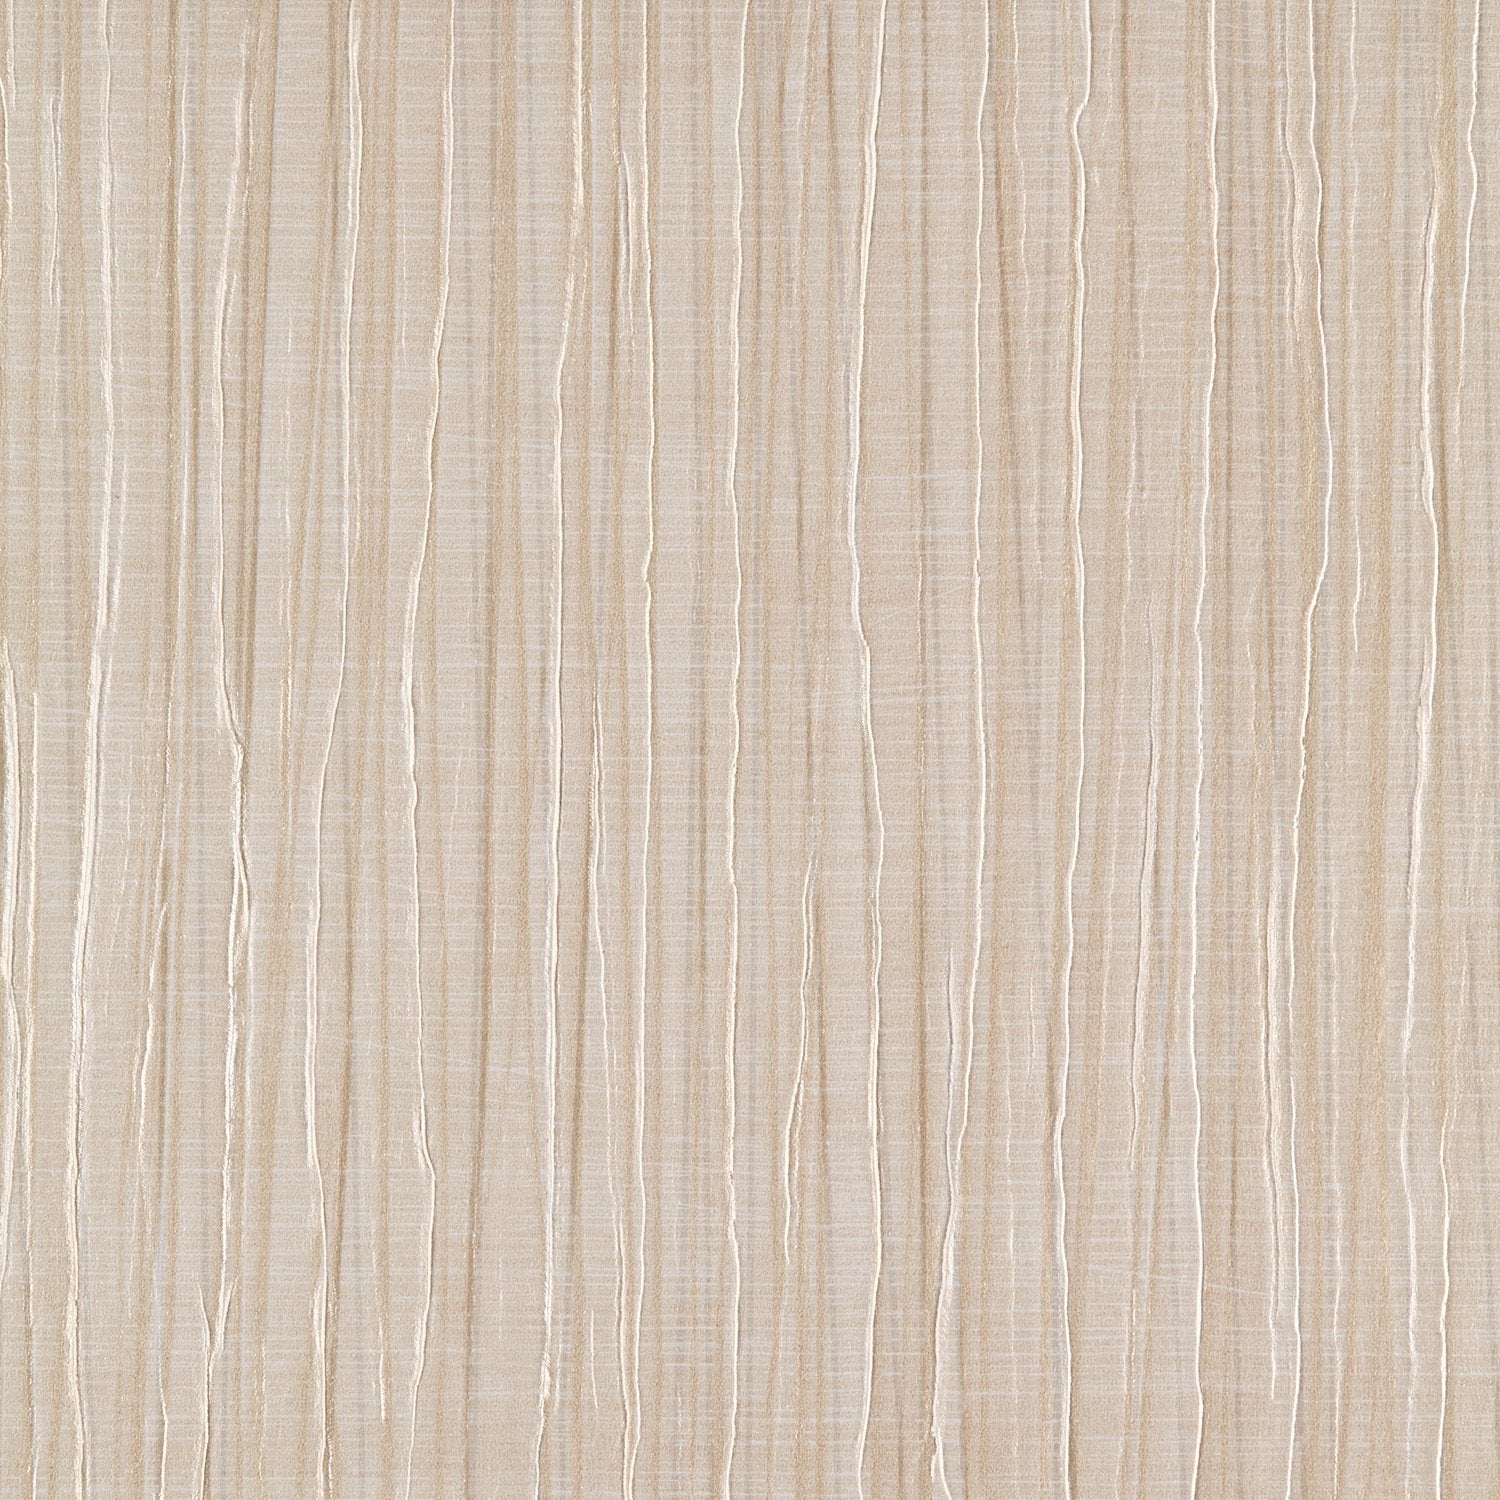 Vogue Pleat - Y47026 - Wallcovering - Vycon - Kube Contract